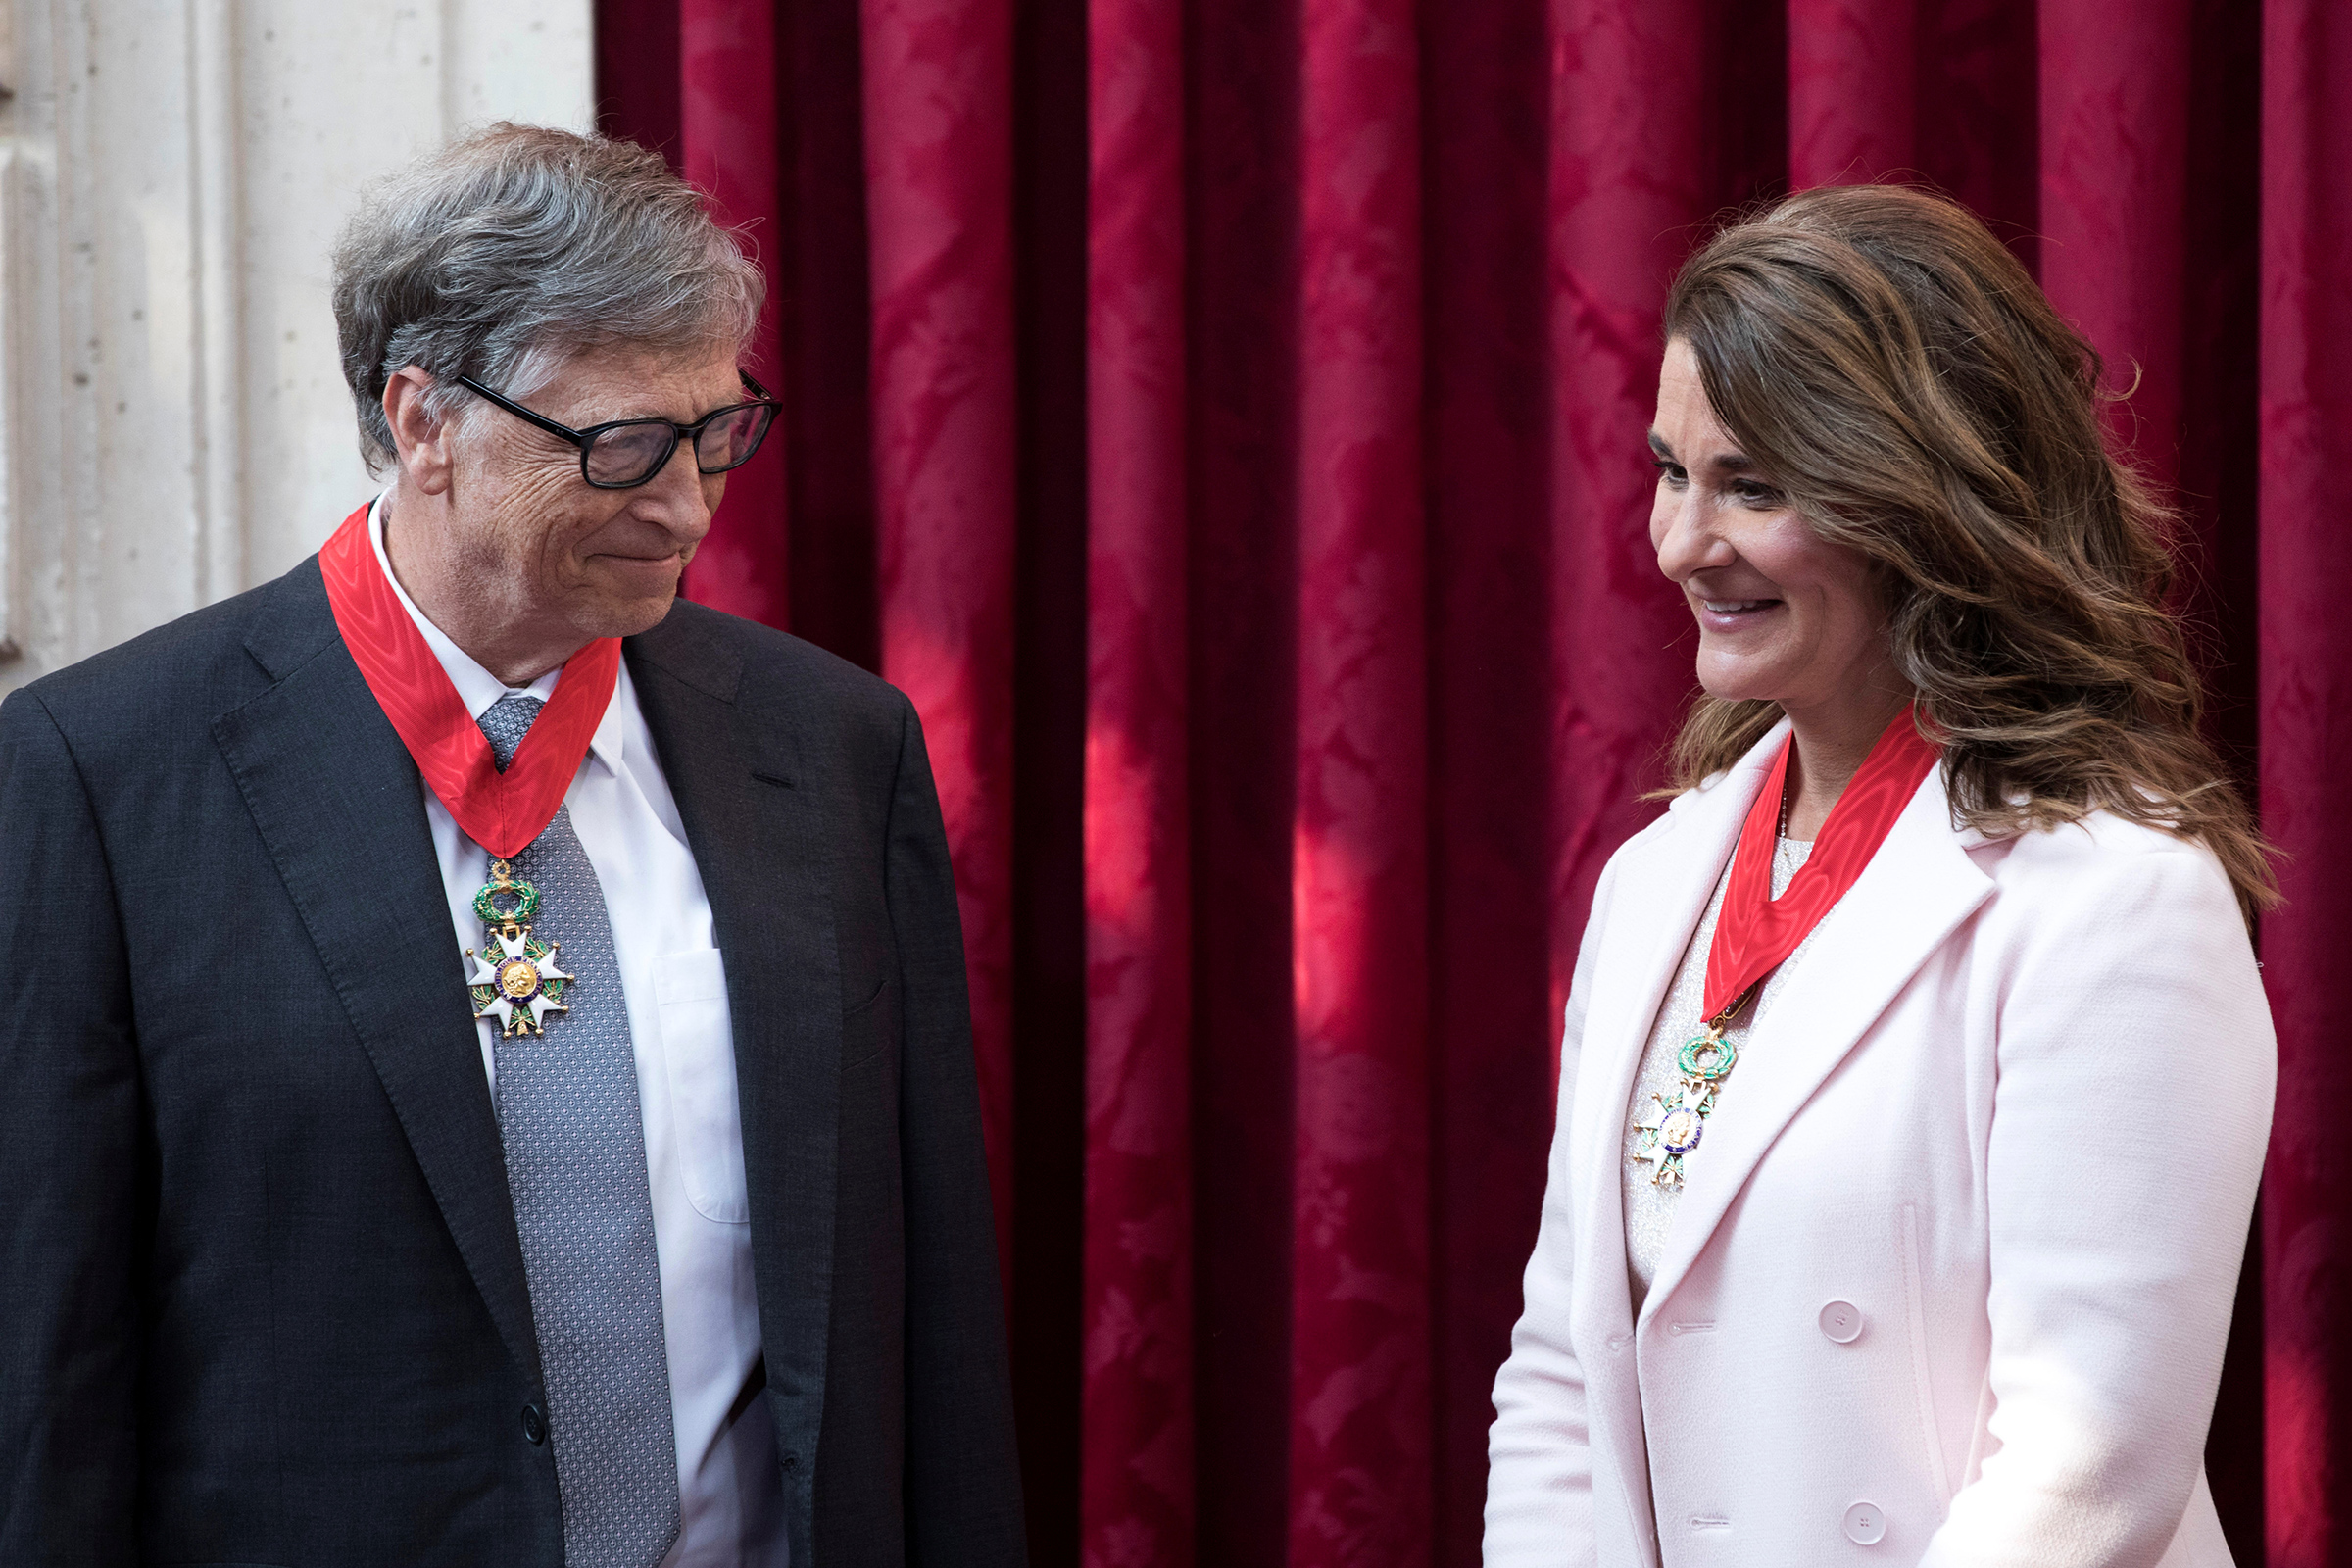 Bill Gates and Melinda Gates after being awarded Commanders of the Legion of Honor at the Élysée Palace in Paris on April 21, 2017. (Kamil Zihnioglu—Pool/Reuters)